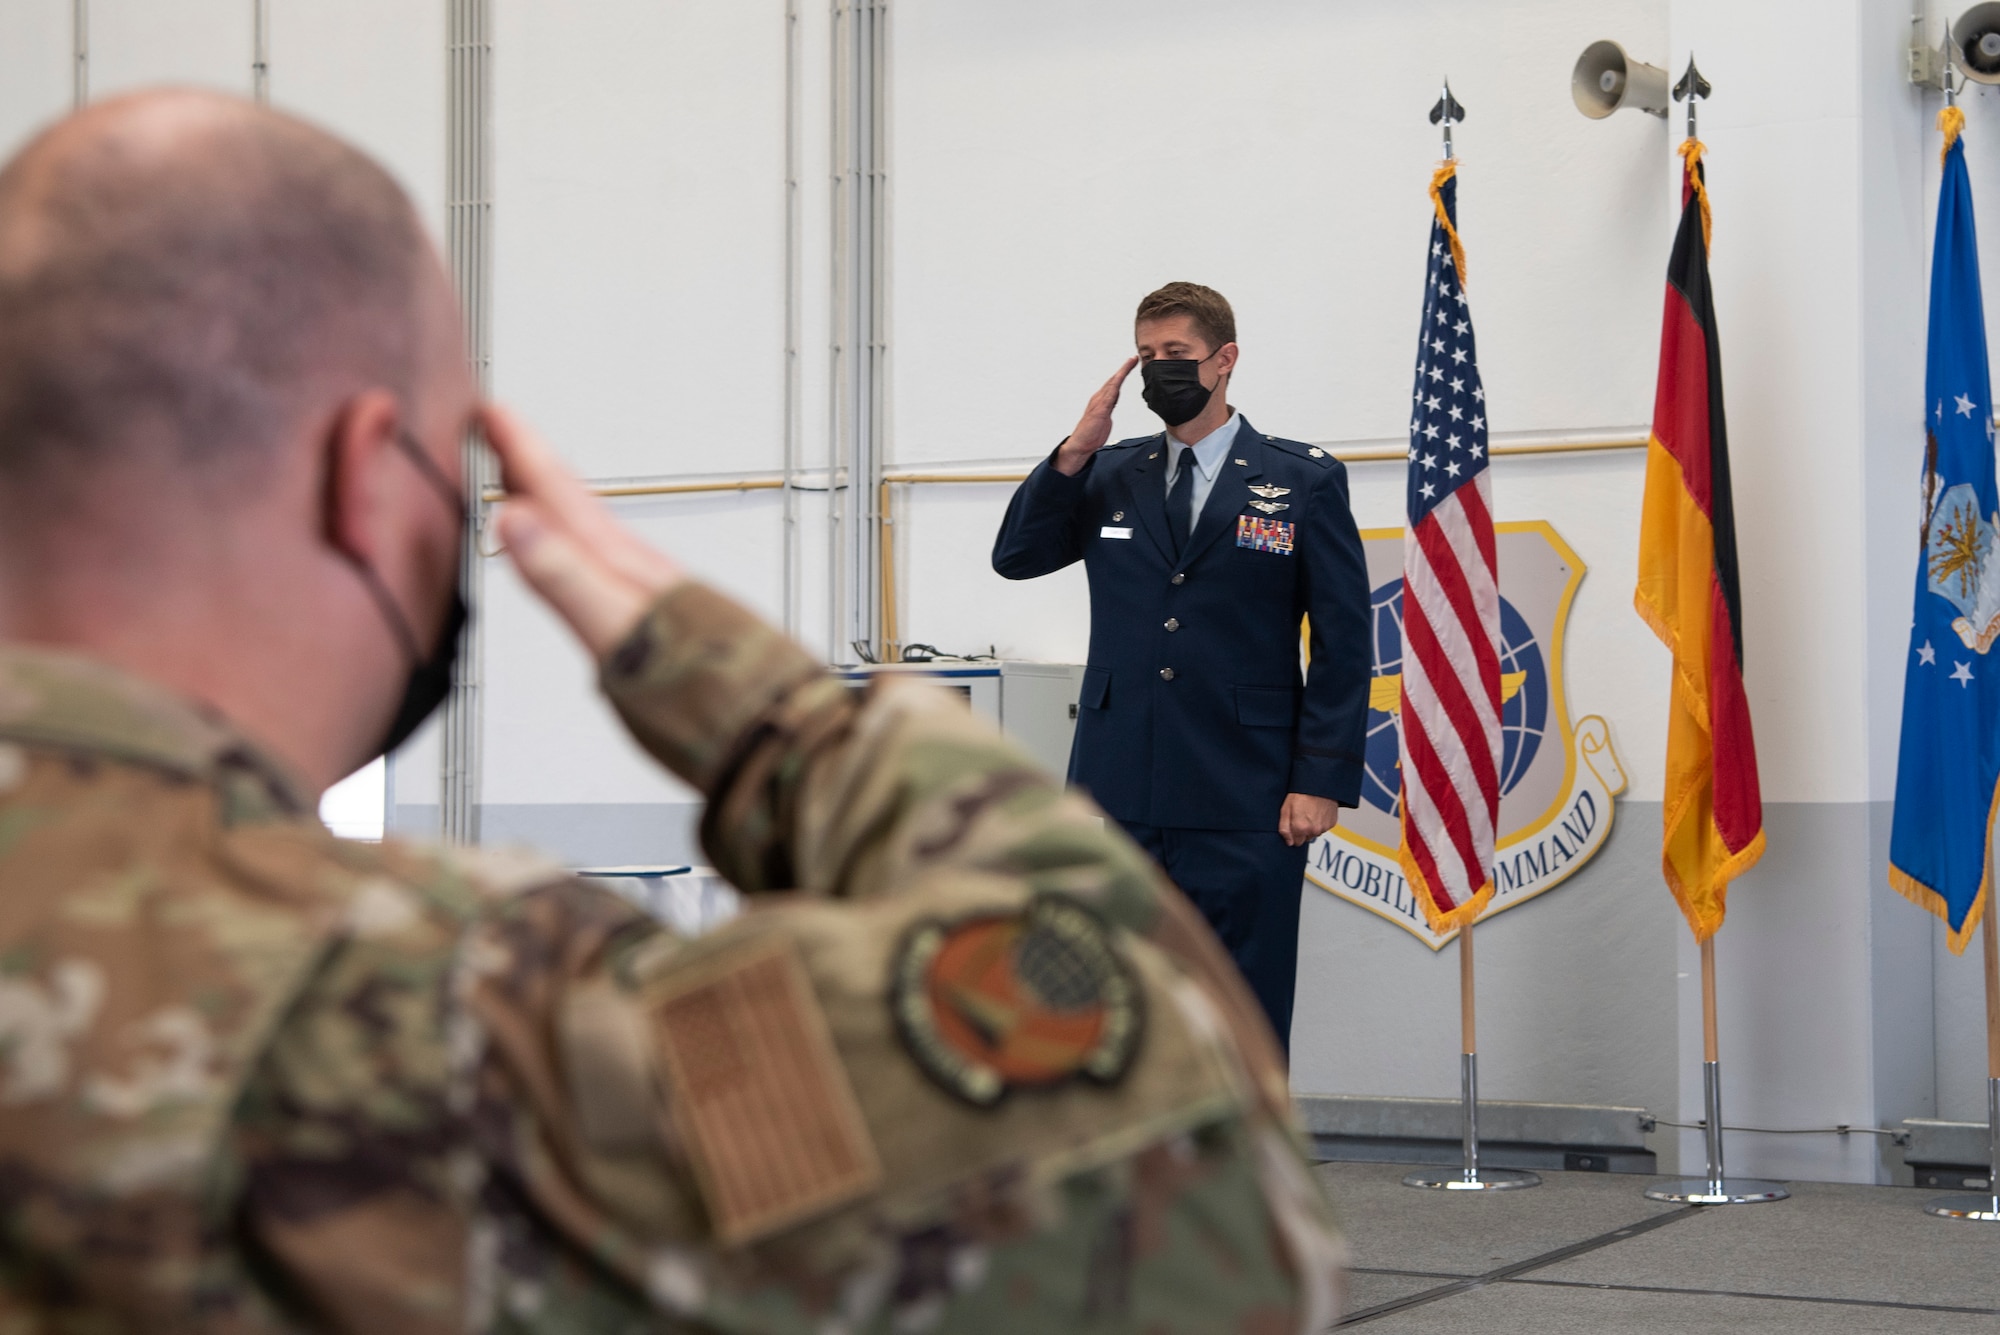 U.S. Air Force Lt. Col. Joshua Coakley, the new 726th Air Mobility Squadron commander, returns the first salute to the 726th AMS